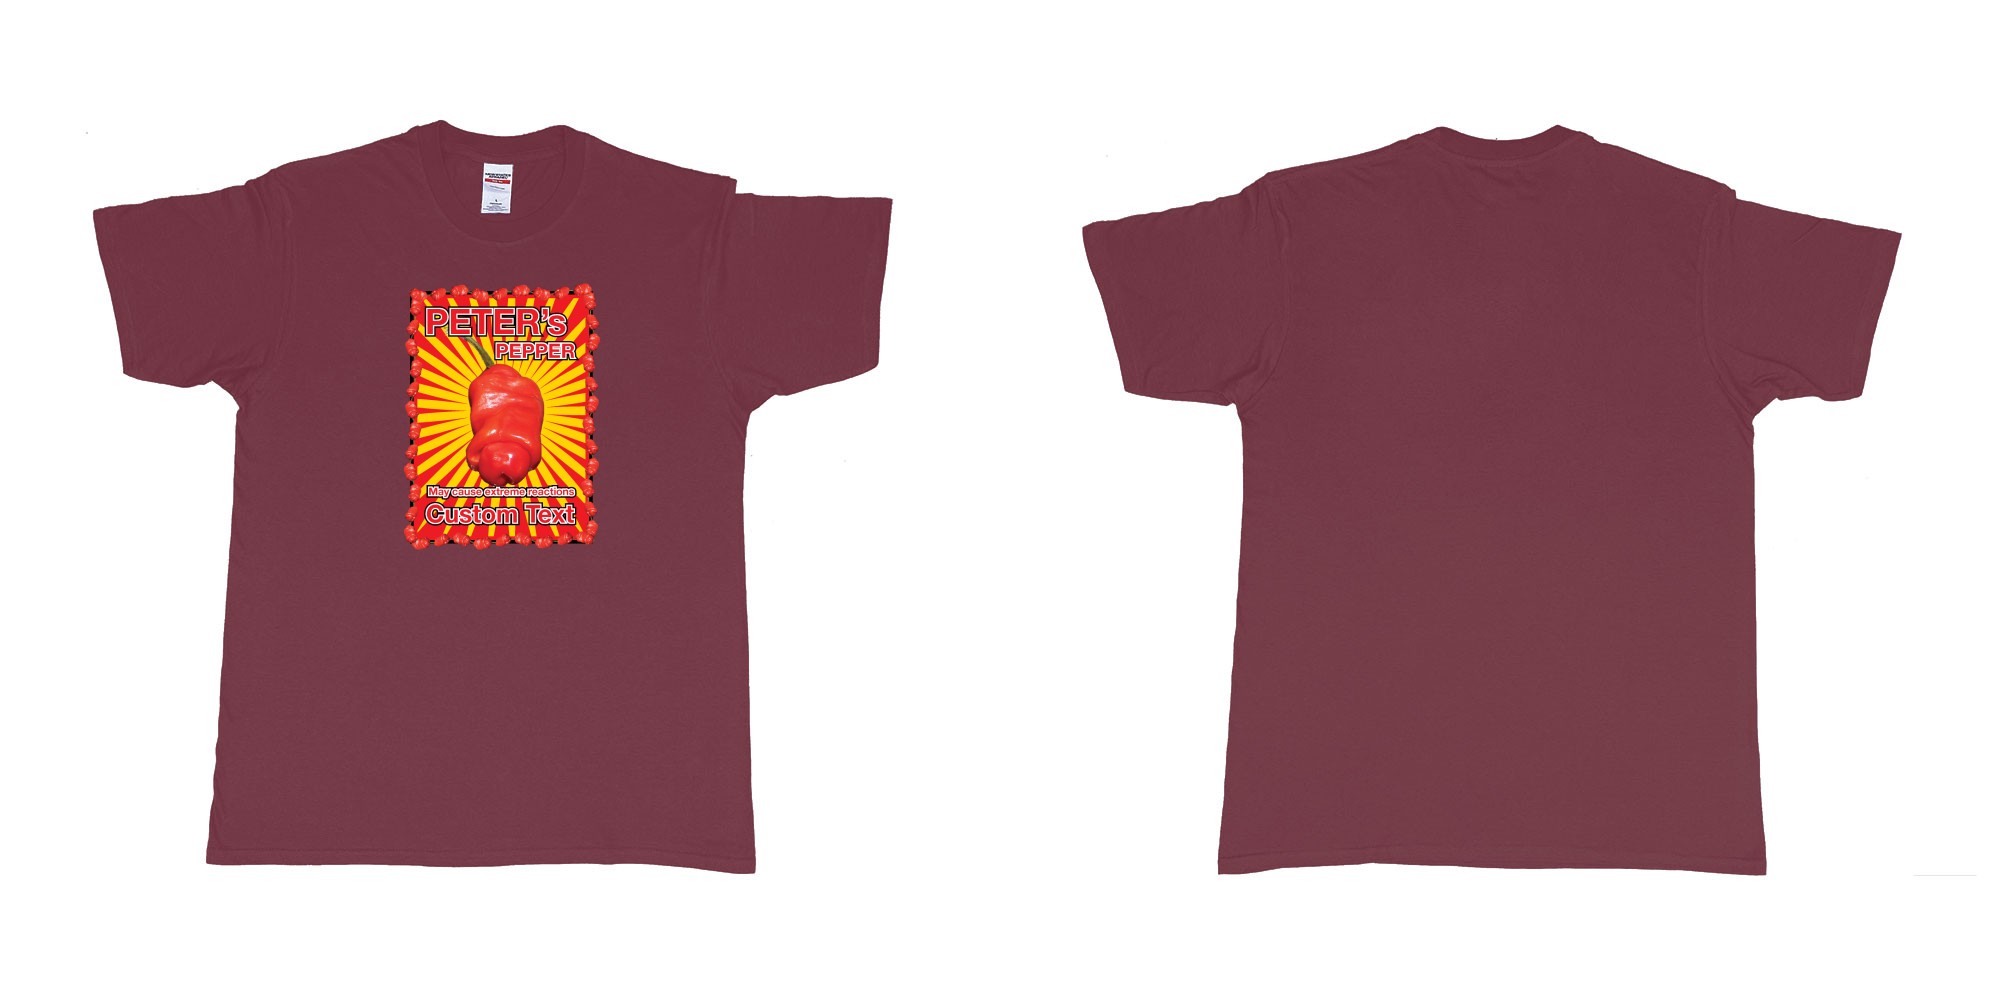 Custom tshirt design  in fabric color marron choice your own text made in Bali by The Pirate Way